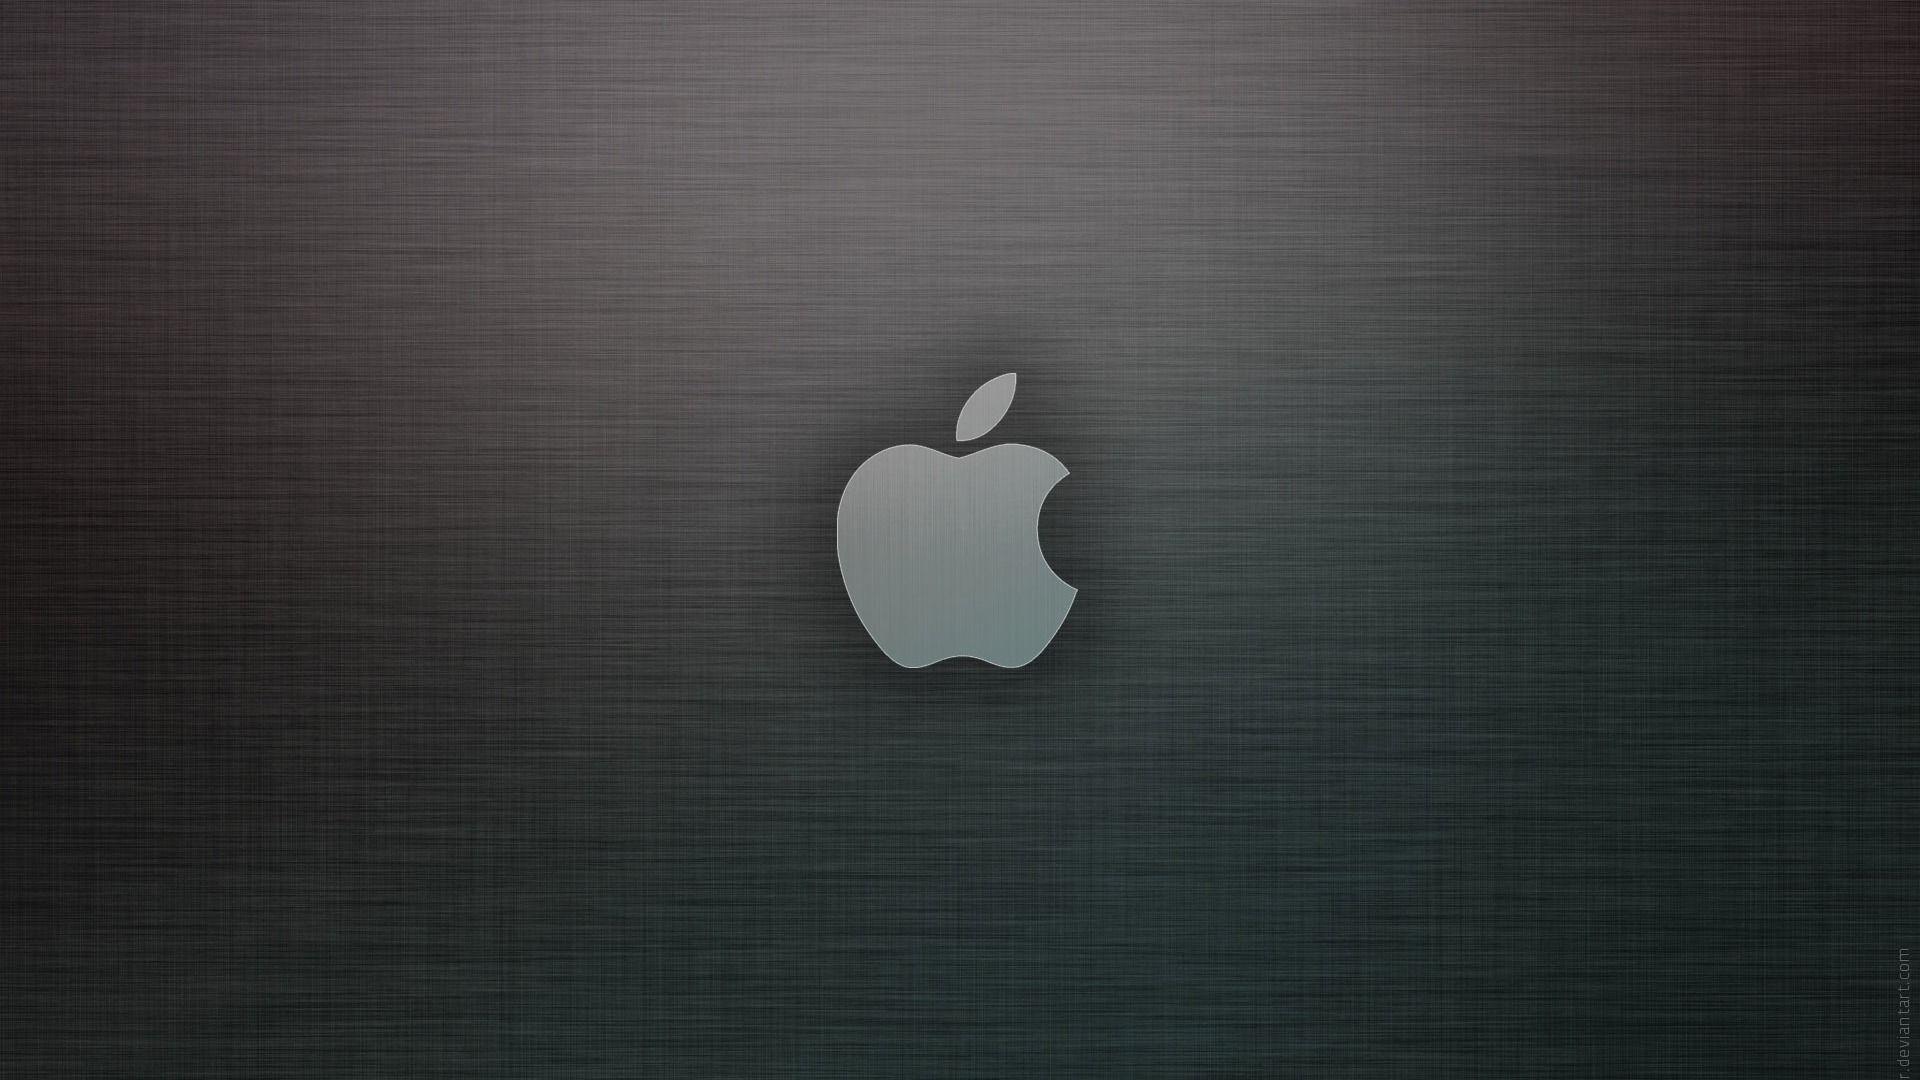 Apple Wallpaper HD For Laptop Imgkid The Image